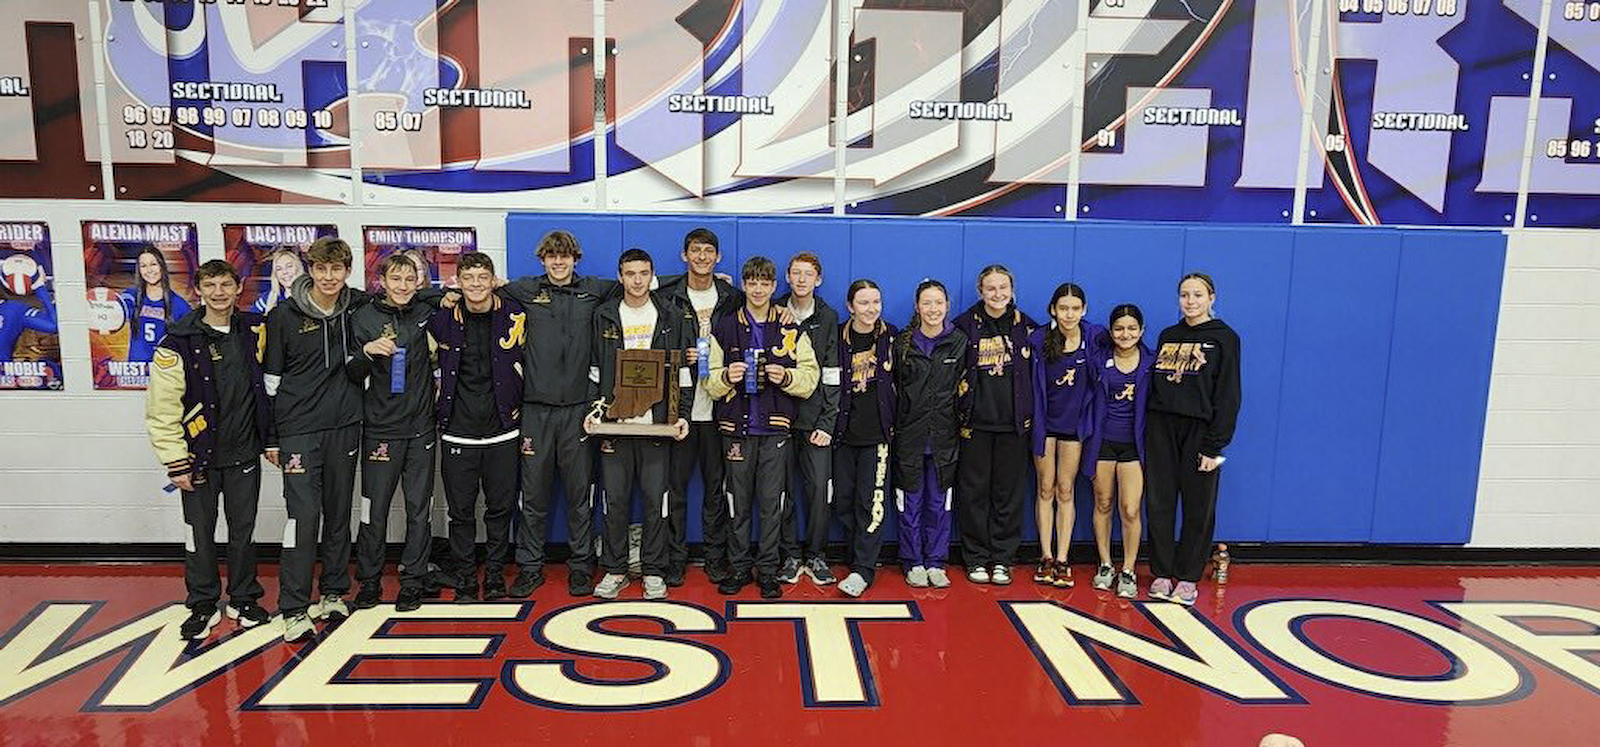 xc champs.png